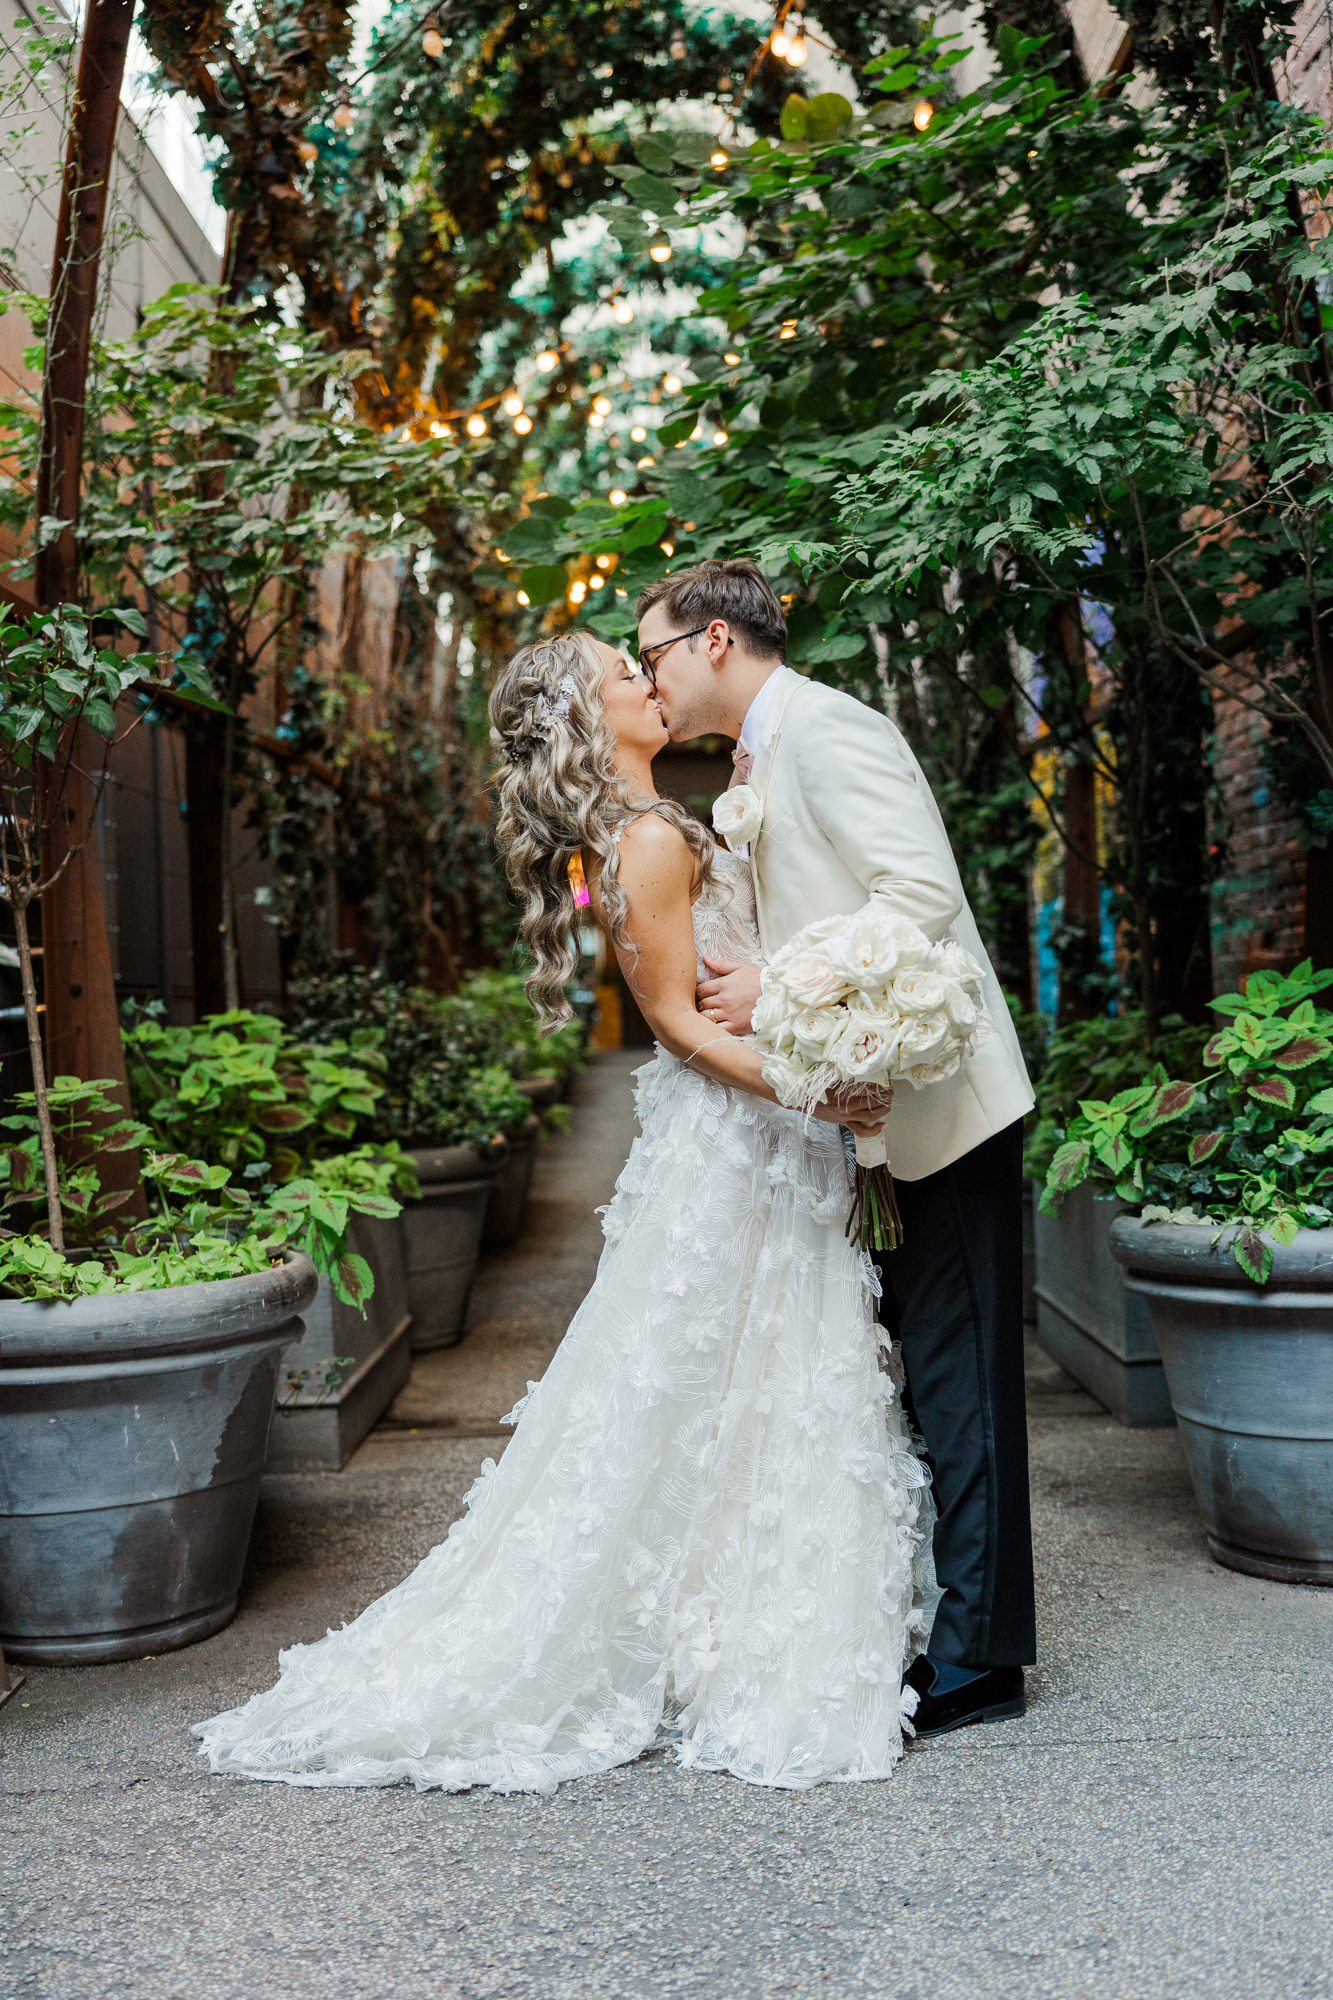 Touching New York Wedding Photos at Old St. Patrick's Cathedral and Houston Hall